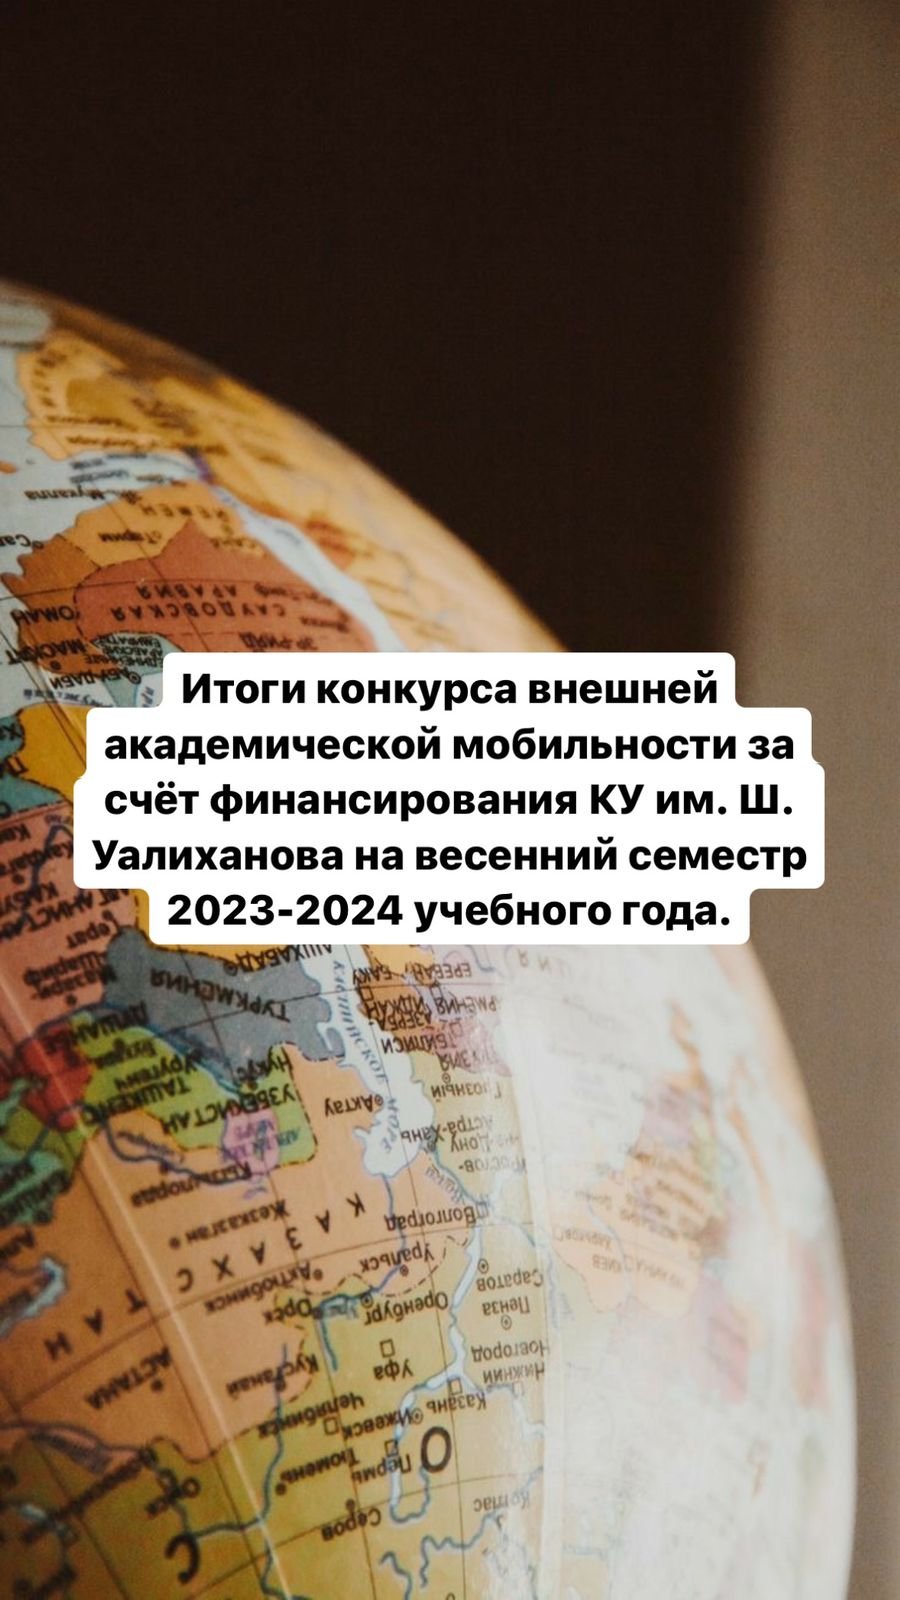 The results of the competition for external academic mobility due to the financing of the Sh. Ualikhanov University for the spring semester of the 2023-2024 academic year.